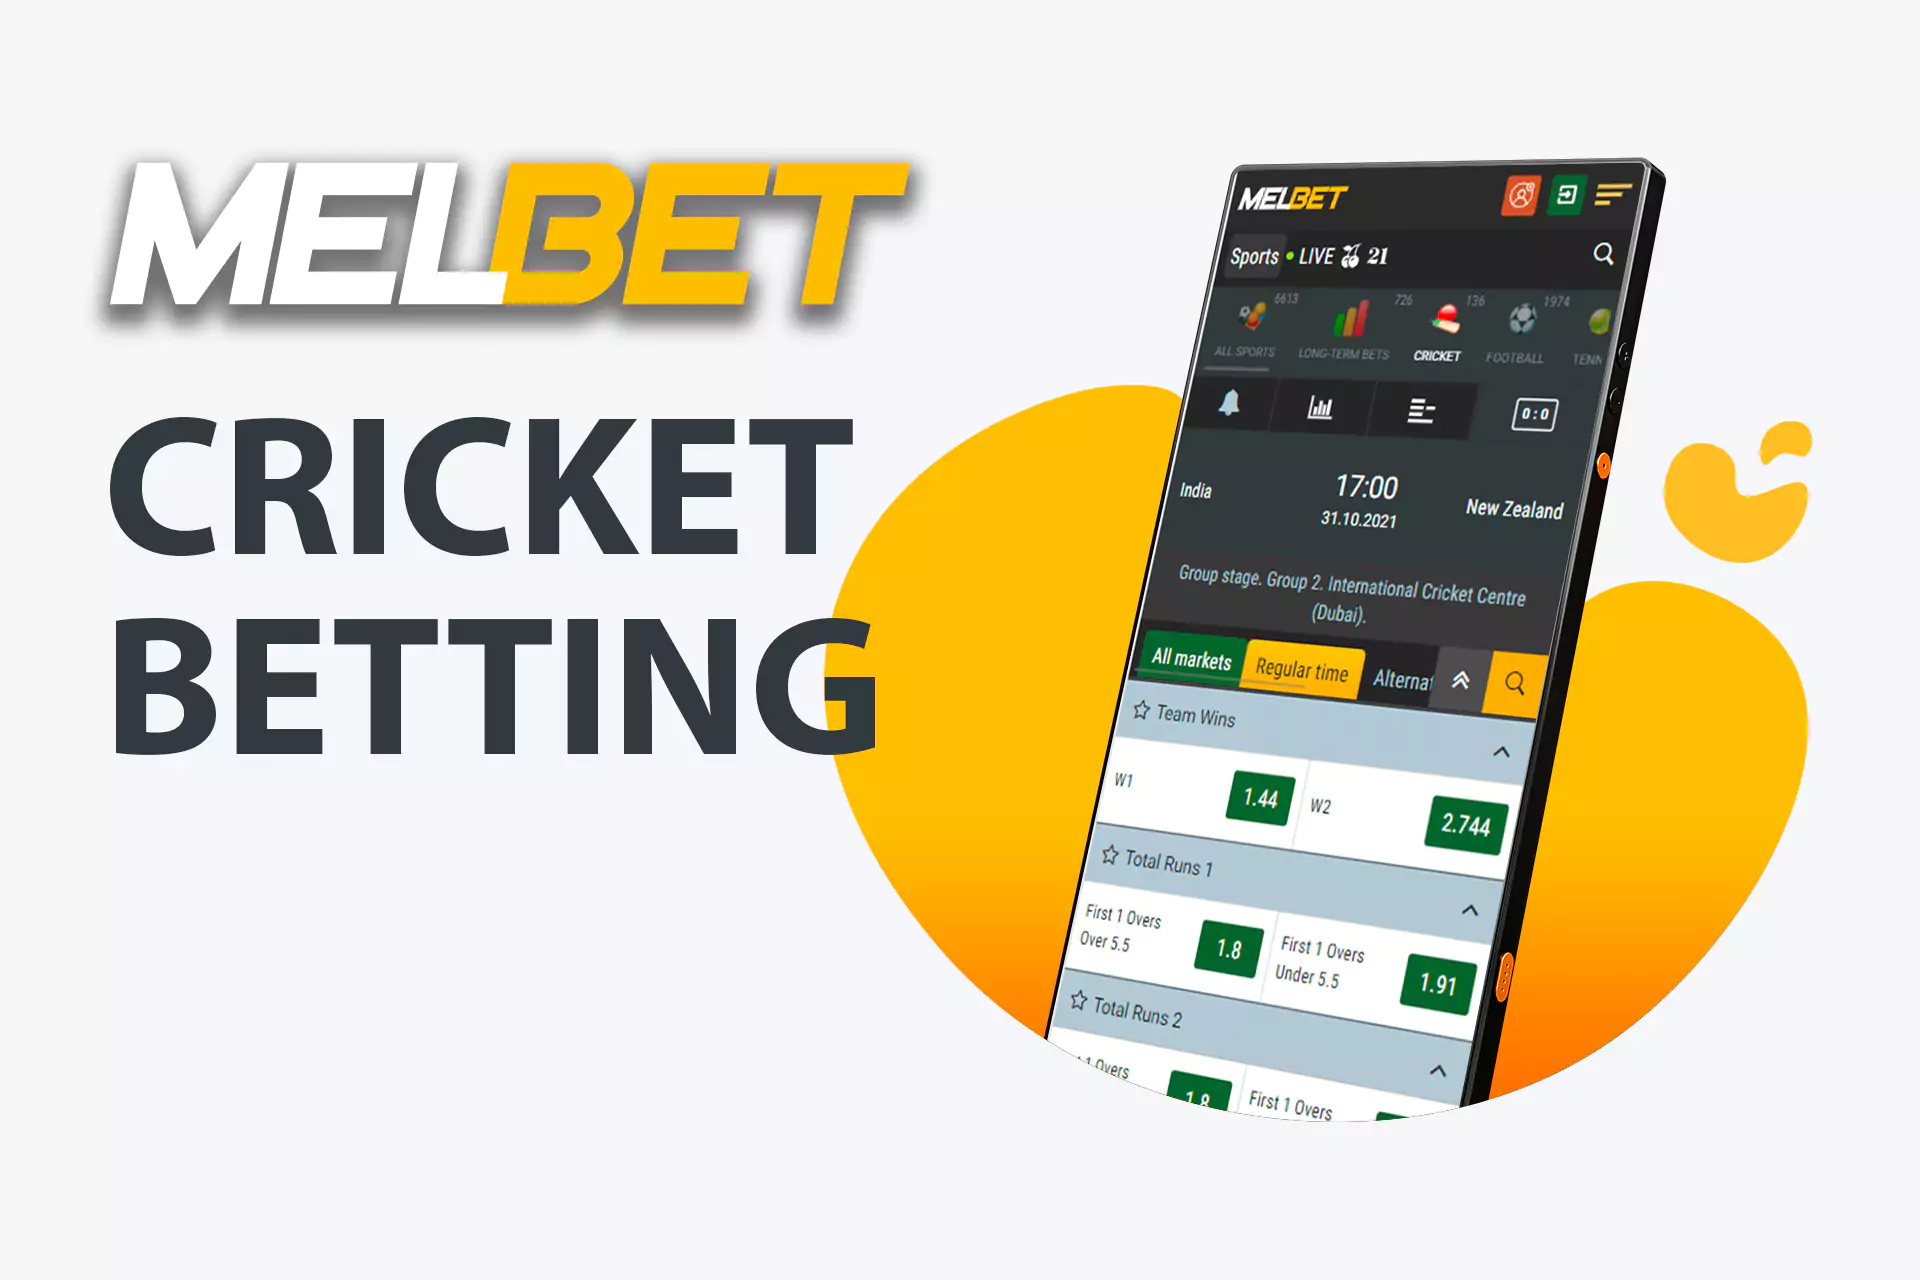 Melbet offers great odds on cricket events betting.